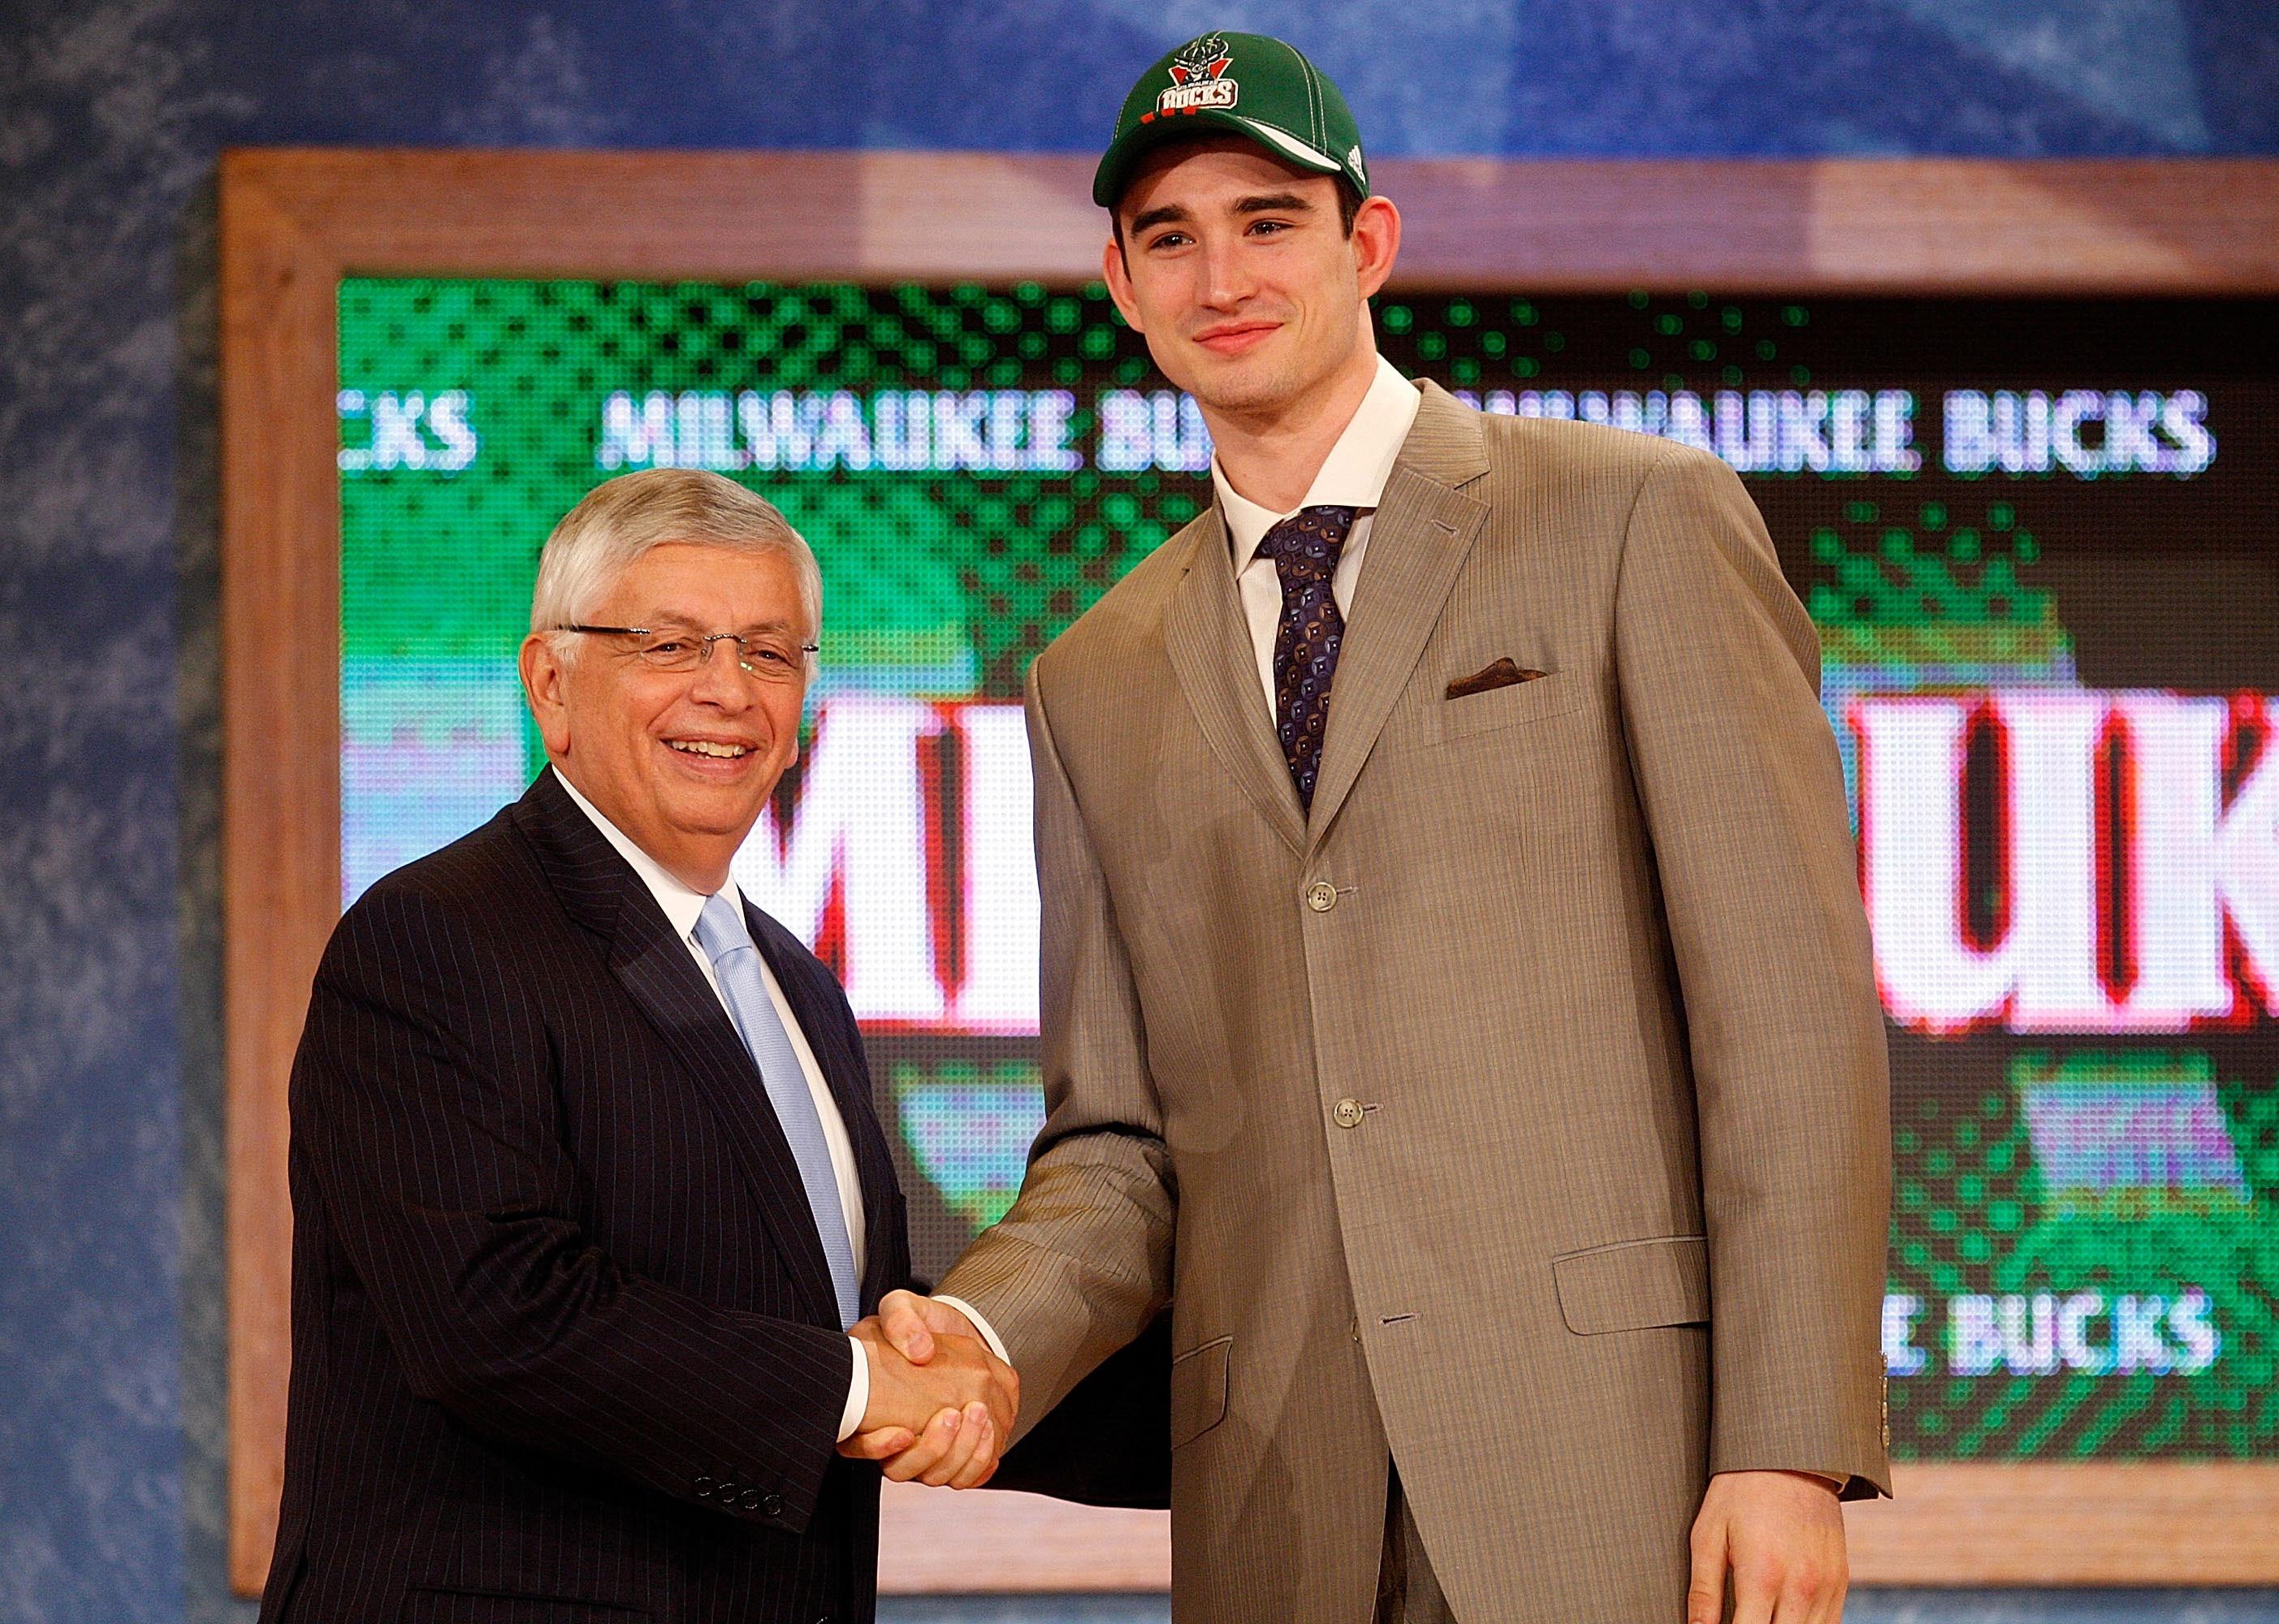 NBA Commissioner David Stern shakes hands with Joe Alexander during the 2008 NBA Draft.